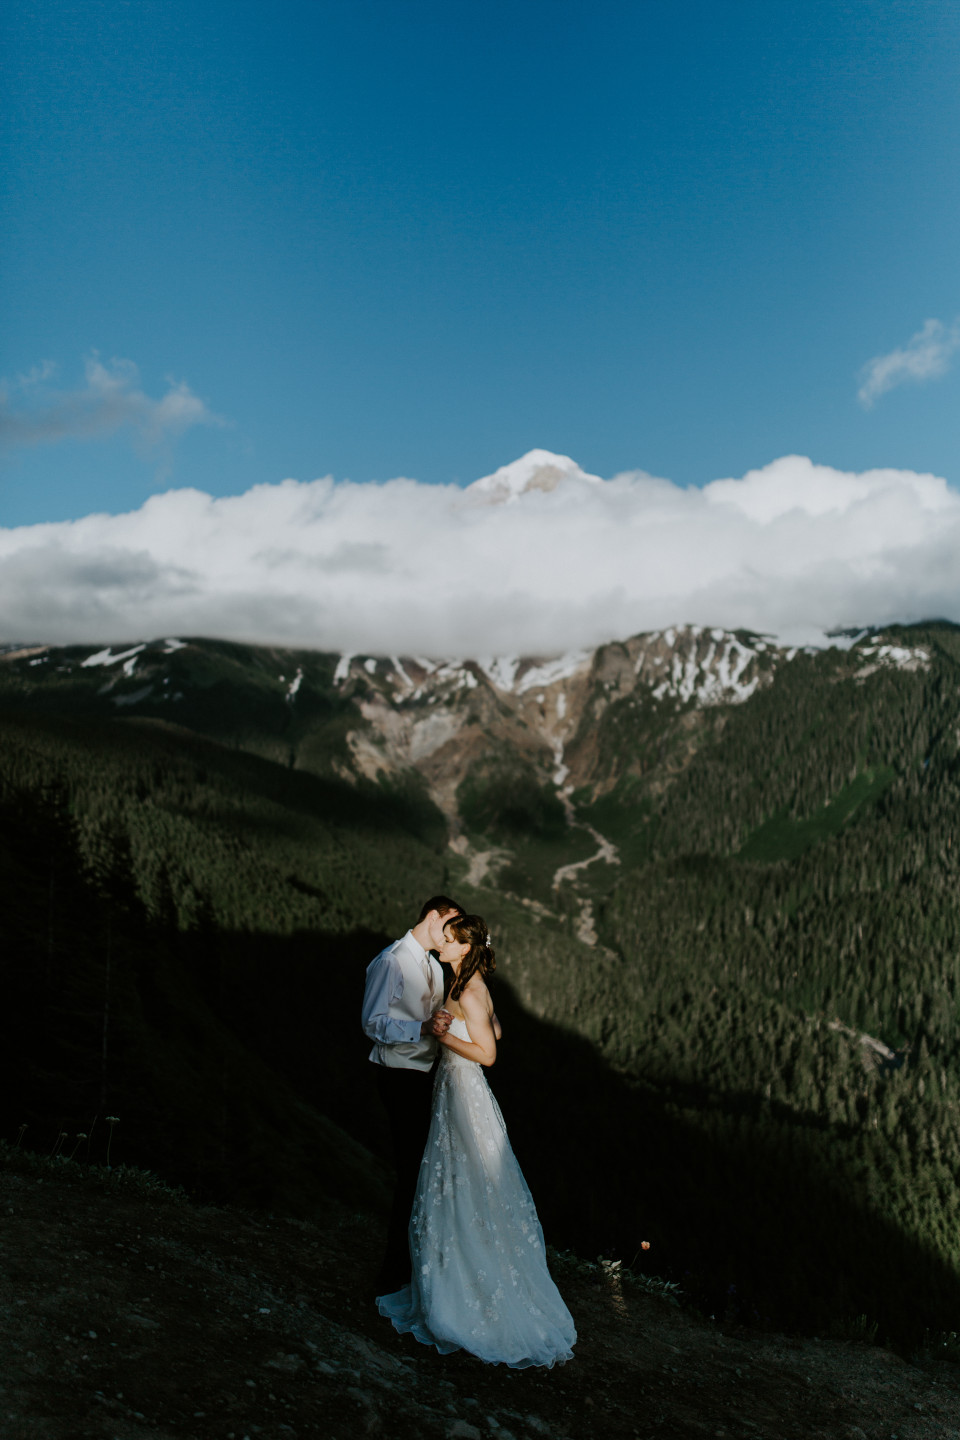 Ryan and Moira move in for a kiss in front of Mount Hood. Adventure elopement wedding shoot by Sienna Plus Josh.